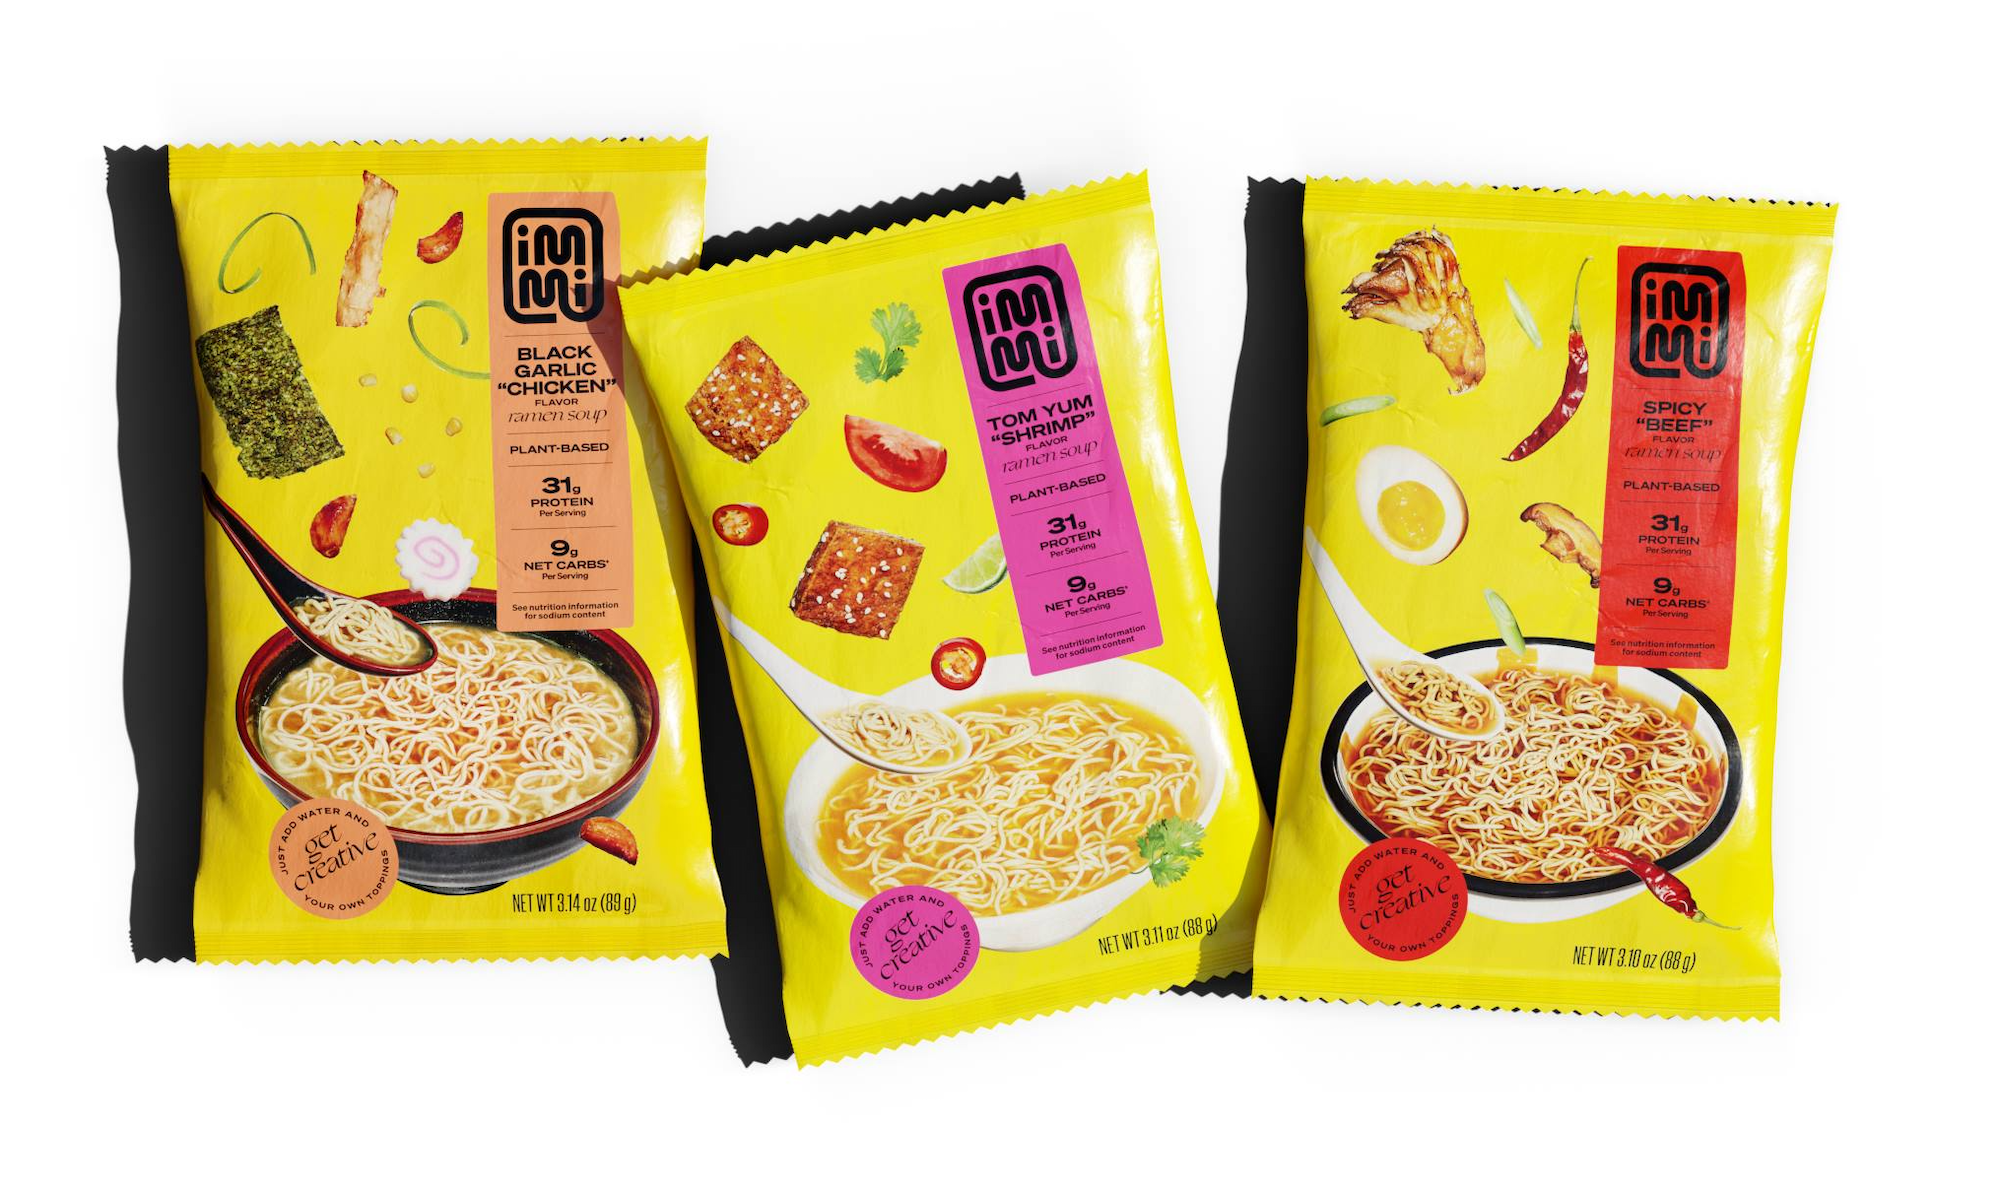 US-based company Immi's ramen is made from plant protein